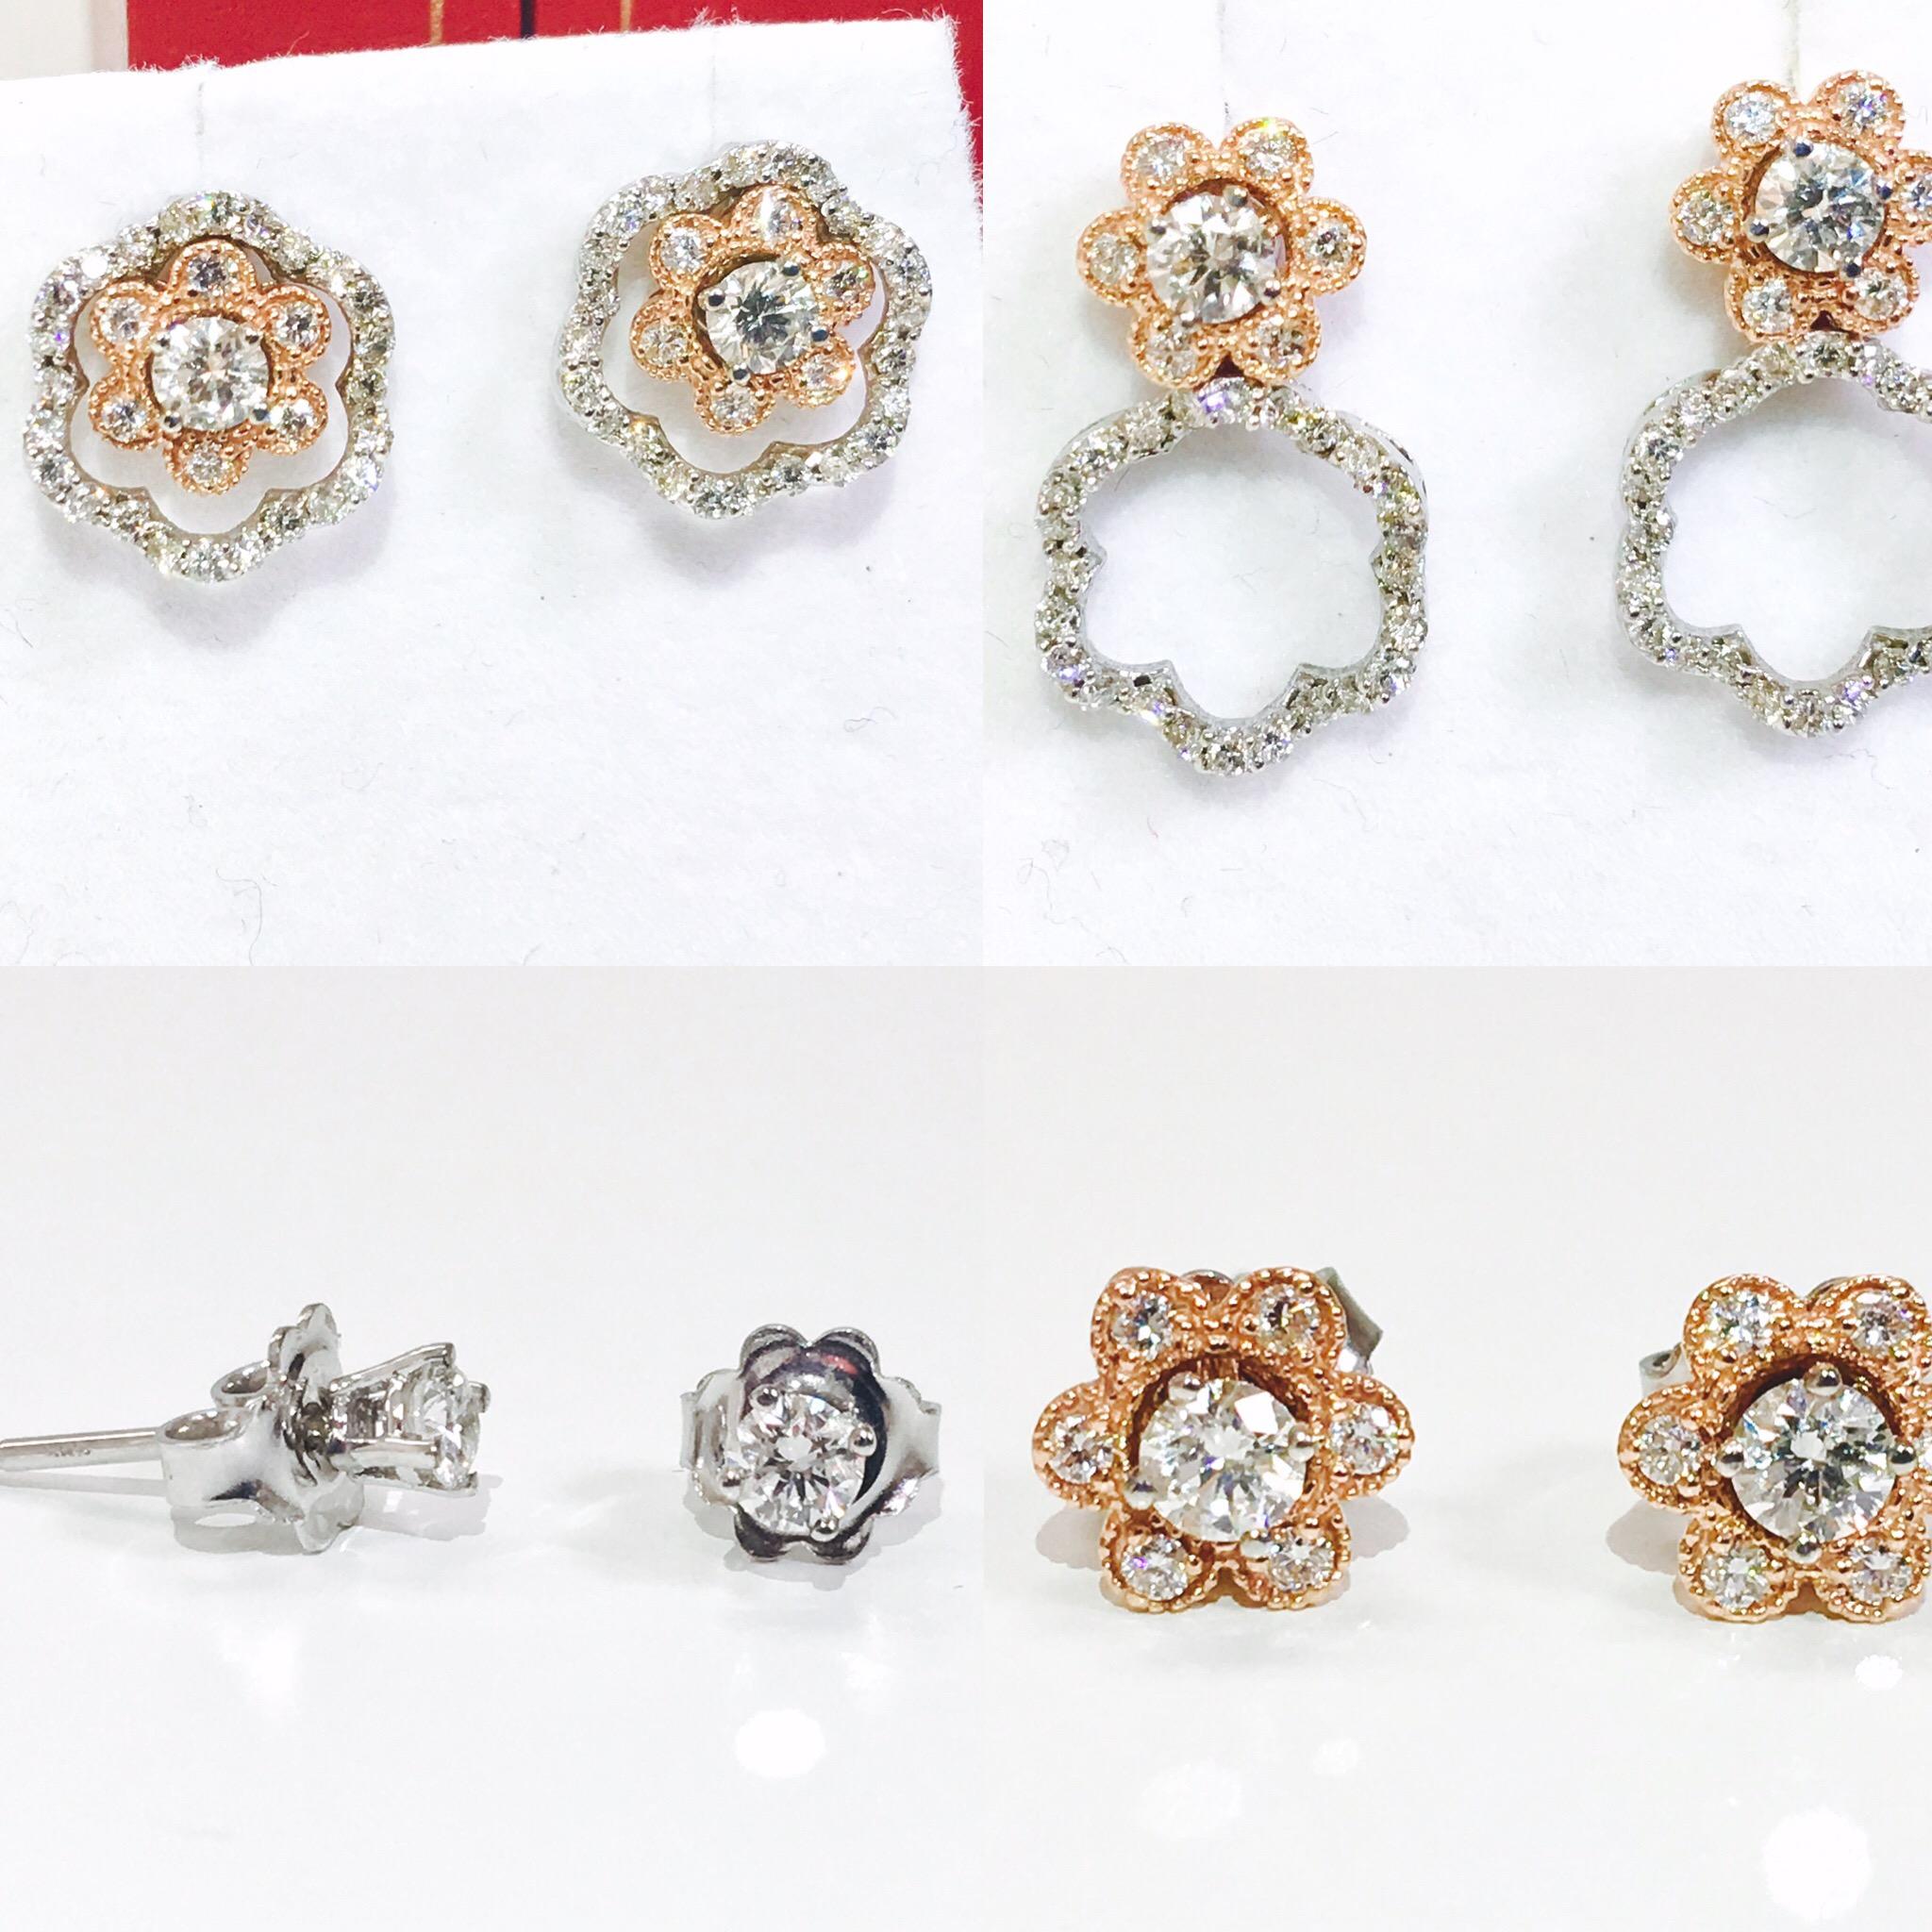 Metal: 14K white and rose gold (two tone)
1.50 carat diamonds. VS clarity and G color. Round brilliant cut. 100% natural earth mined diamonds.  
Can be styled 4 ways. 
1) Dangle
2) Studs with bezel
3) Flower style studs
4) Classic solitaire studs.